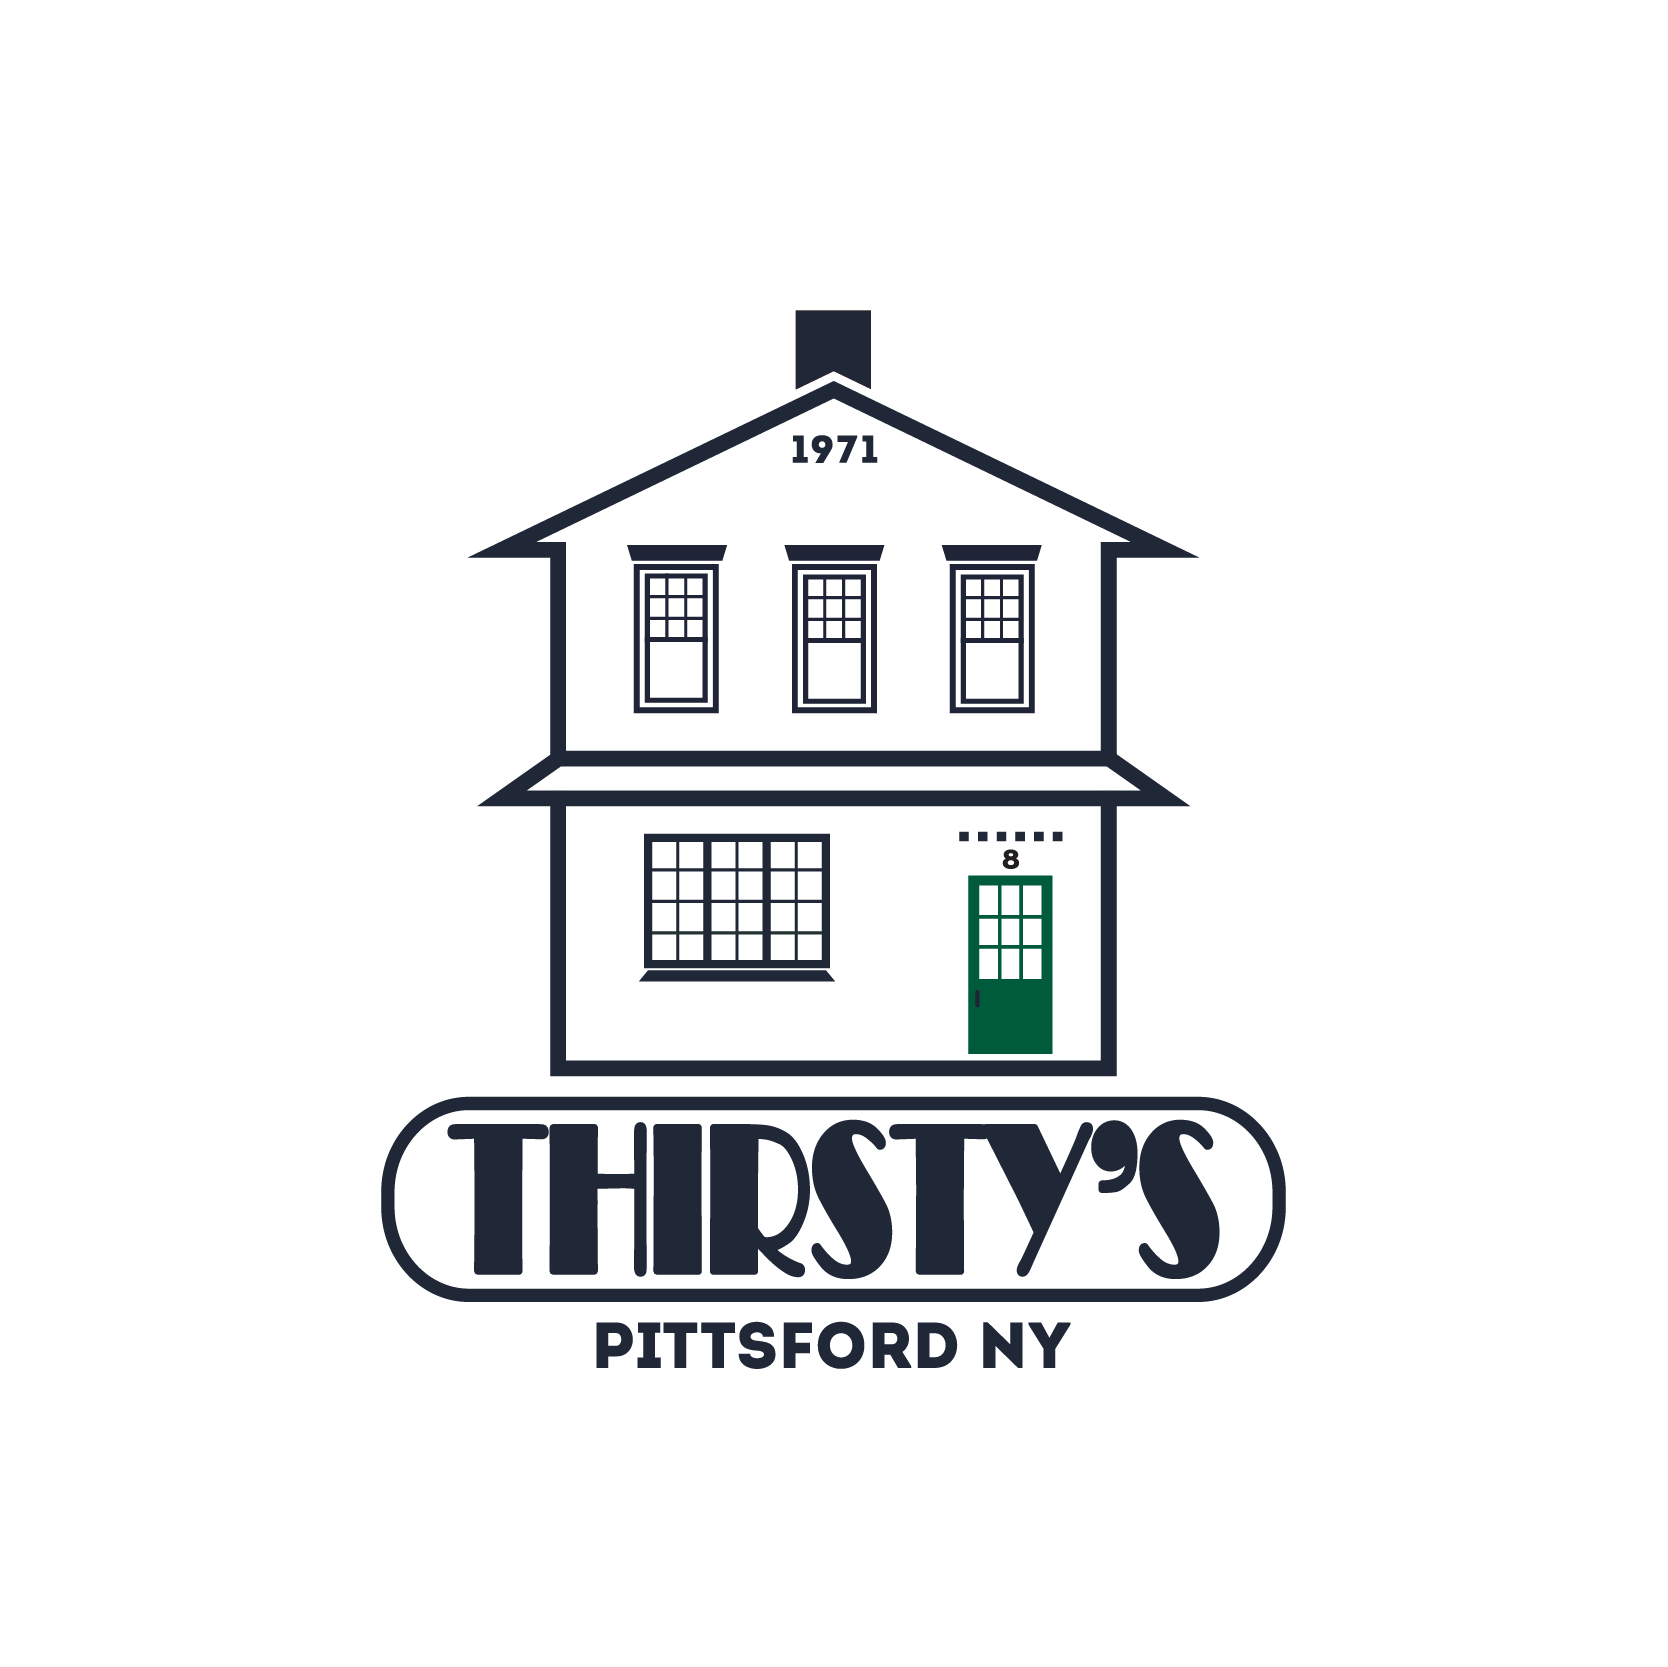 Pittsford-NY-Web-Design-Services-Thirstys-1971